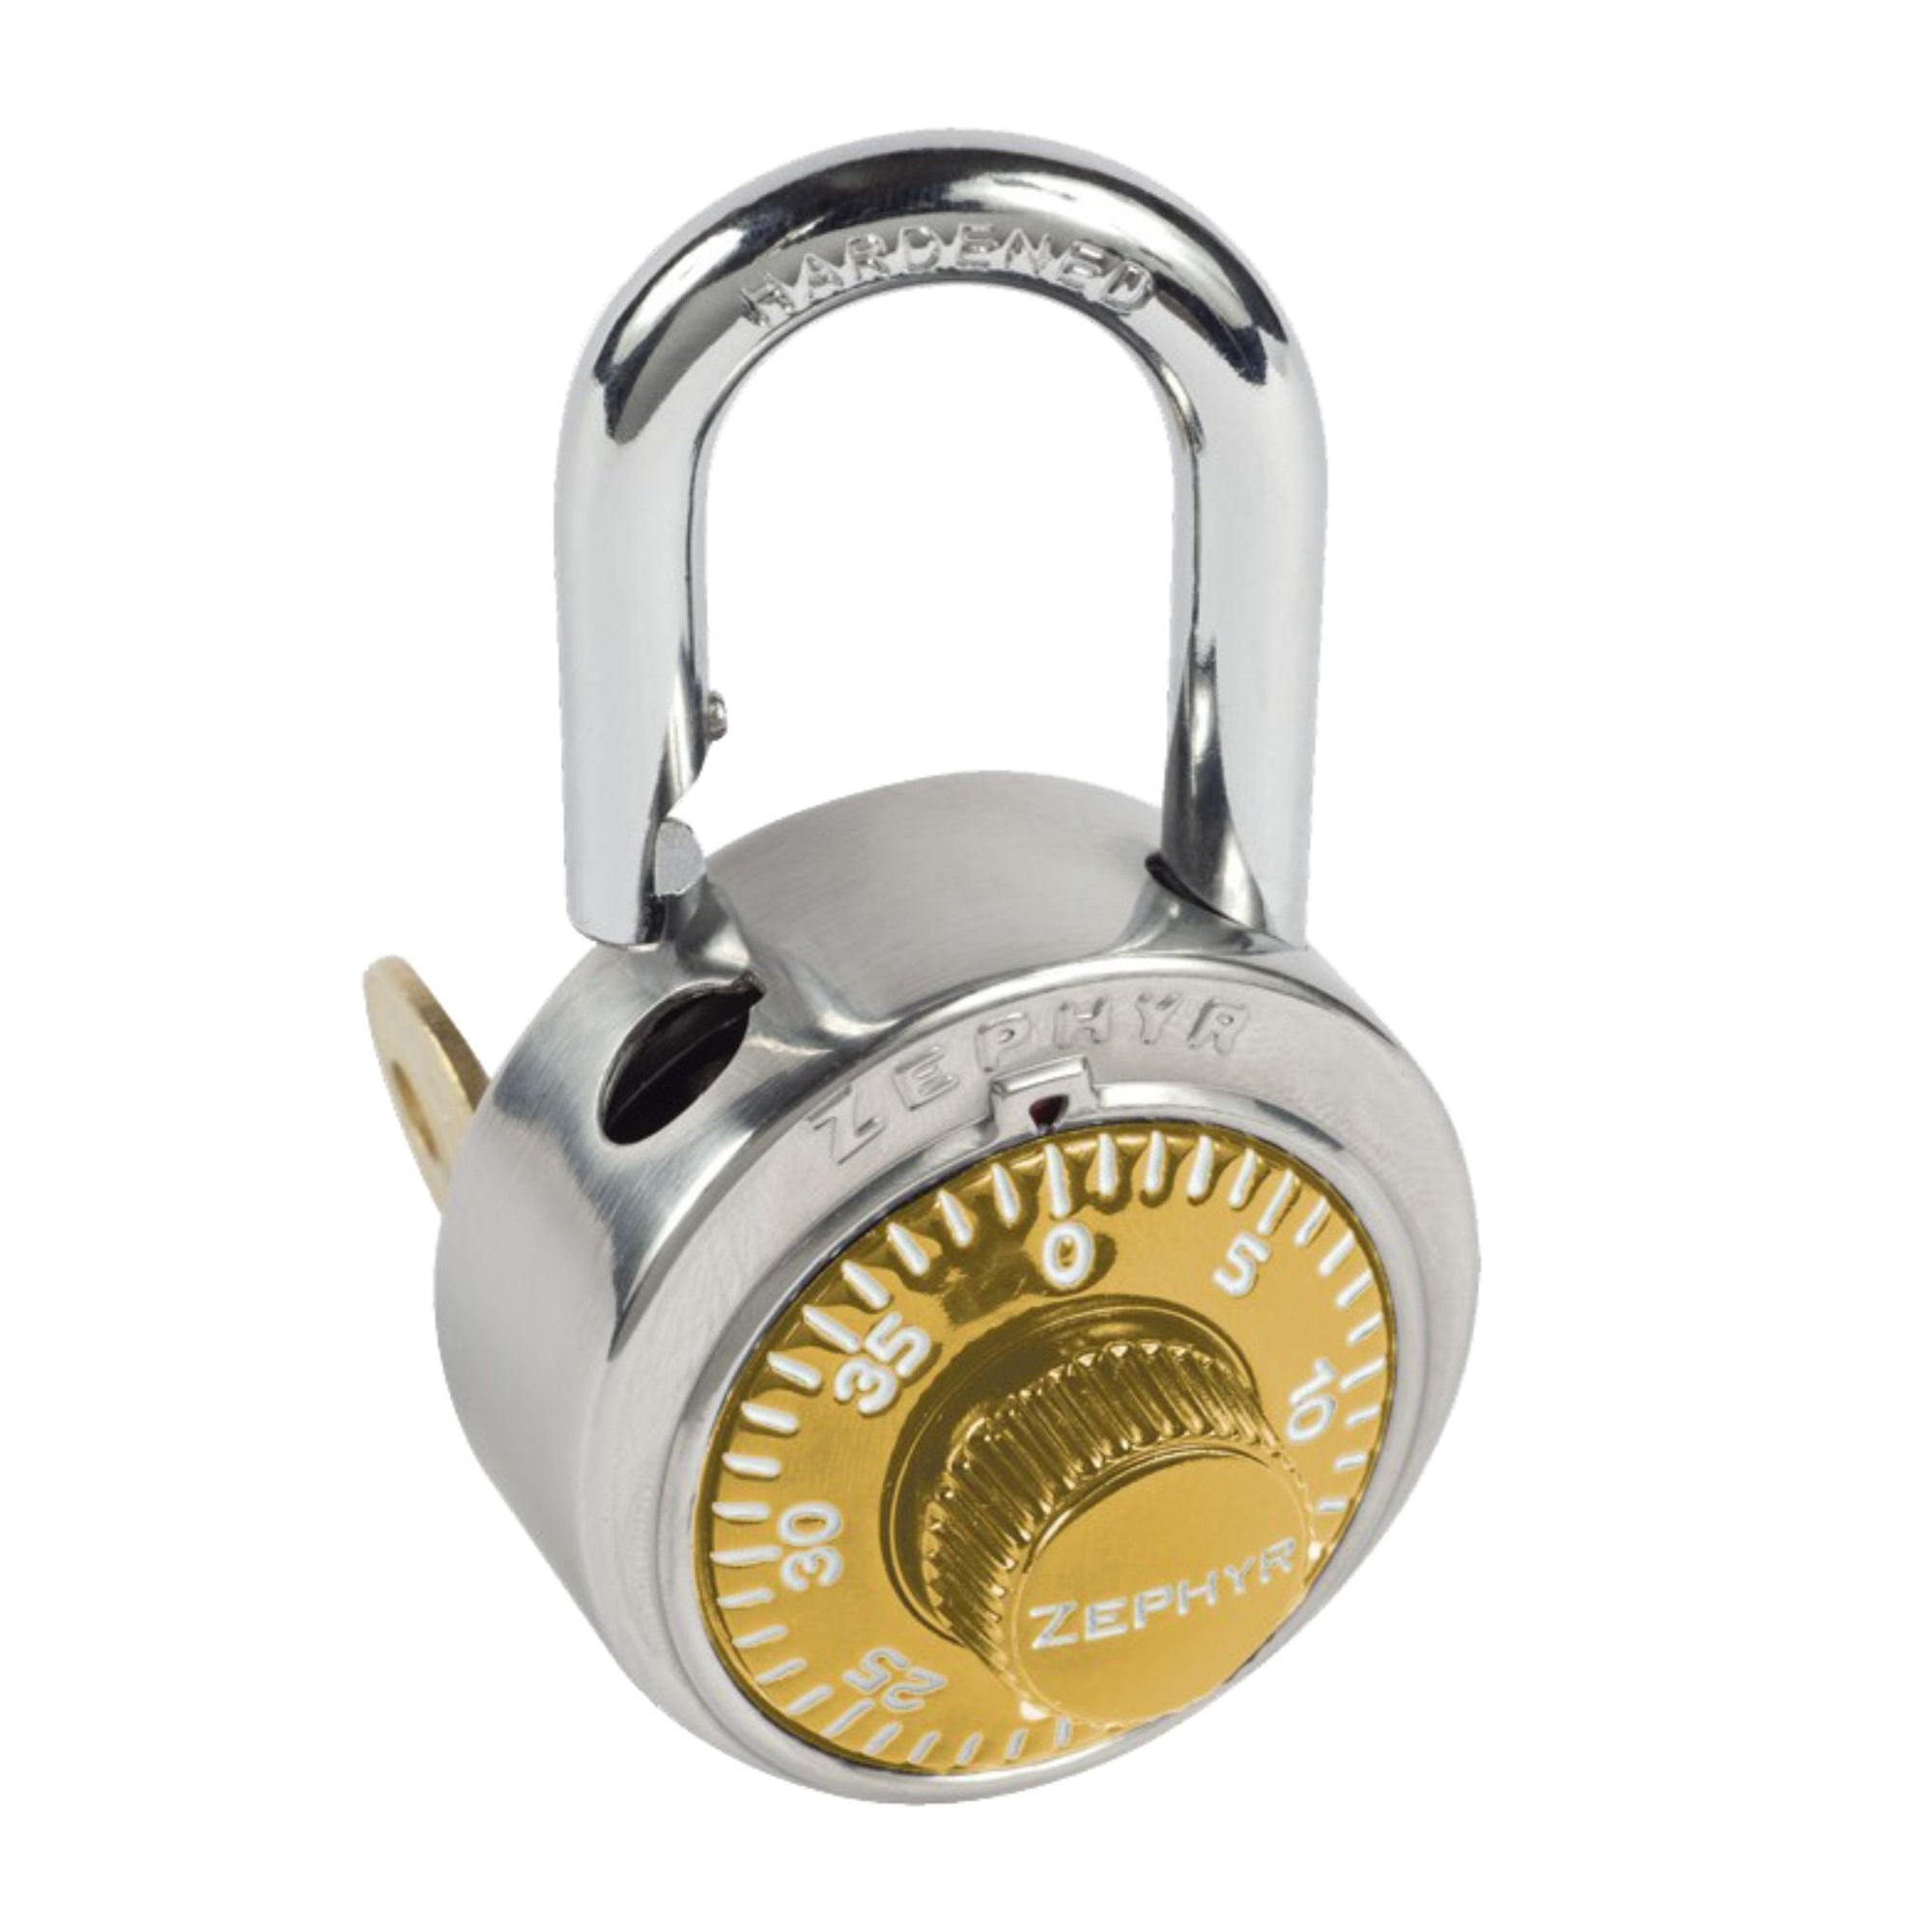 Zephyr Lock 1925GLD Locker Locks Feature 3-Digit Dialing (Gold Dial) With Control Key Override for Supervisory Access - The Lock Source